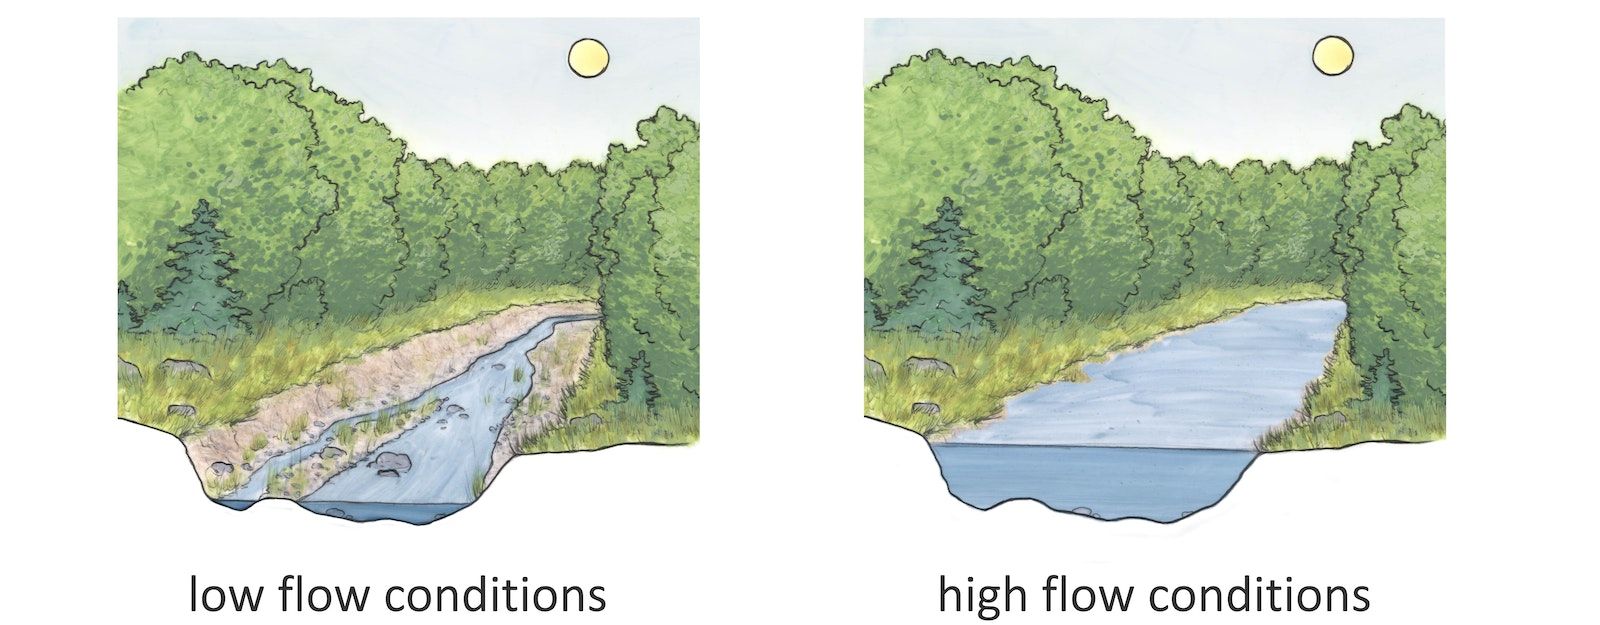 Two hand drawn images of a stream with trees on both shores. The drawing on the left shows low flow conditions and the one on the right shows high flow conditions.